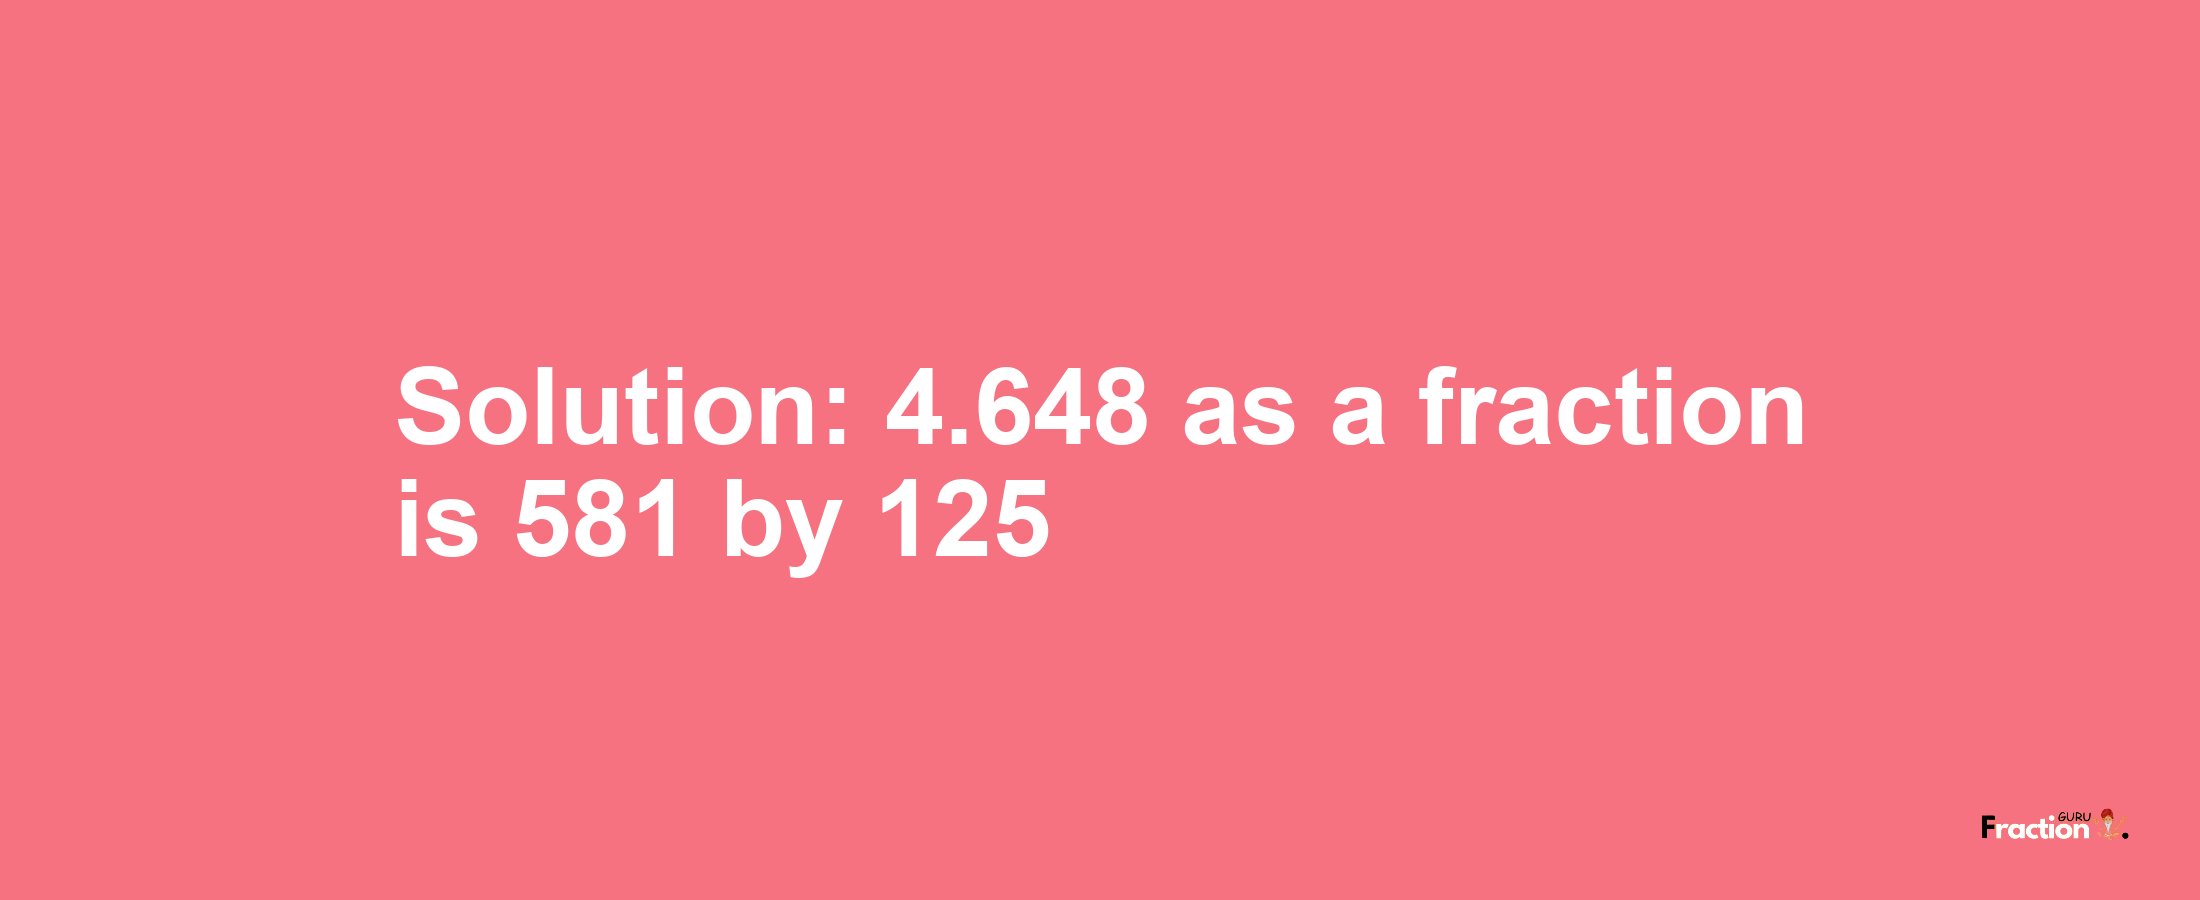 Solution:4.648 as a fraction is 581/125